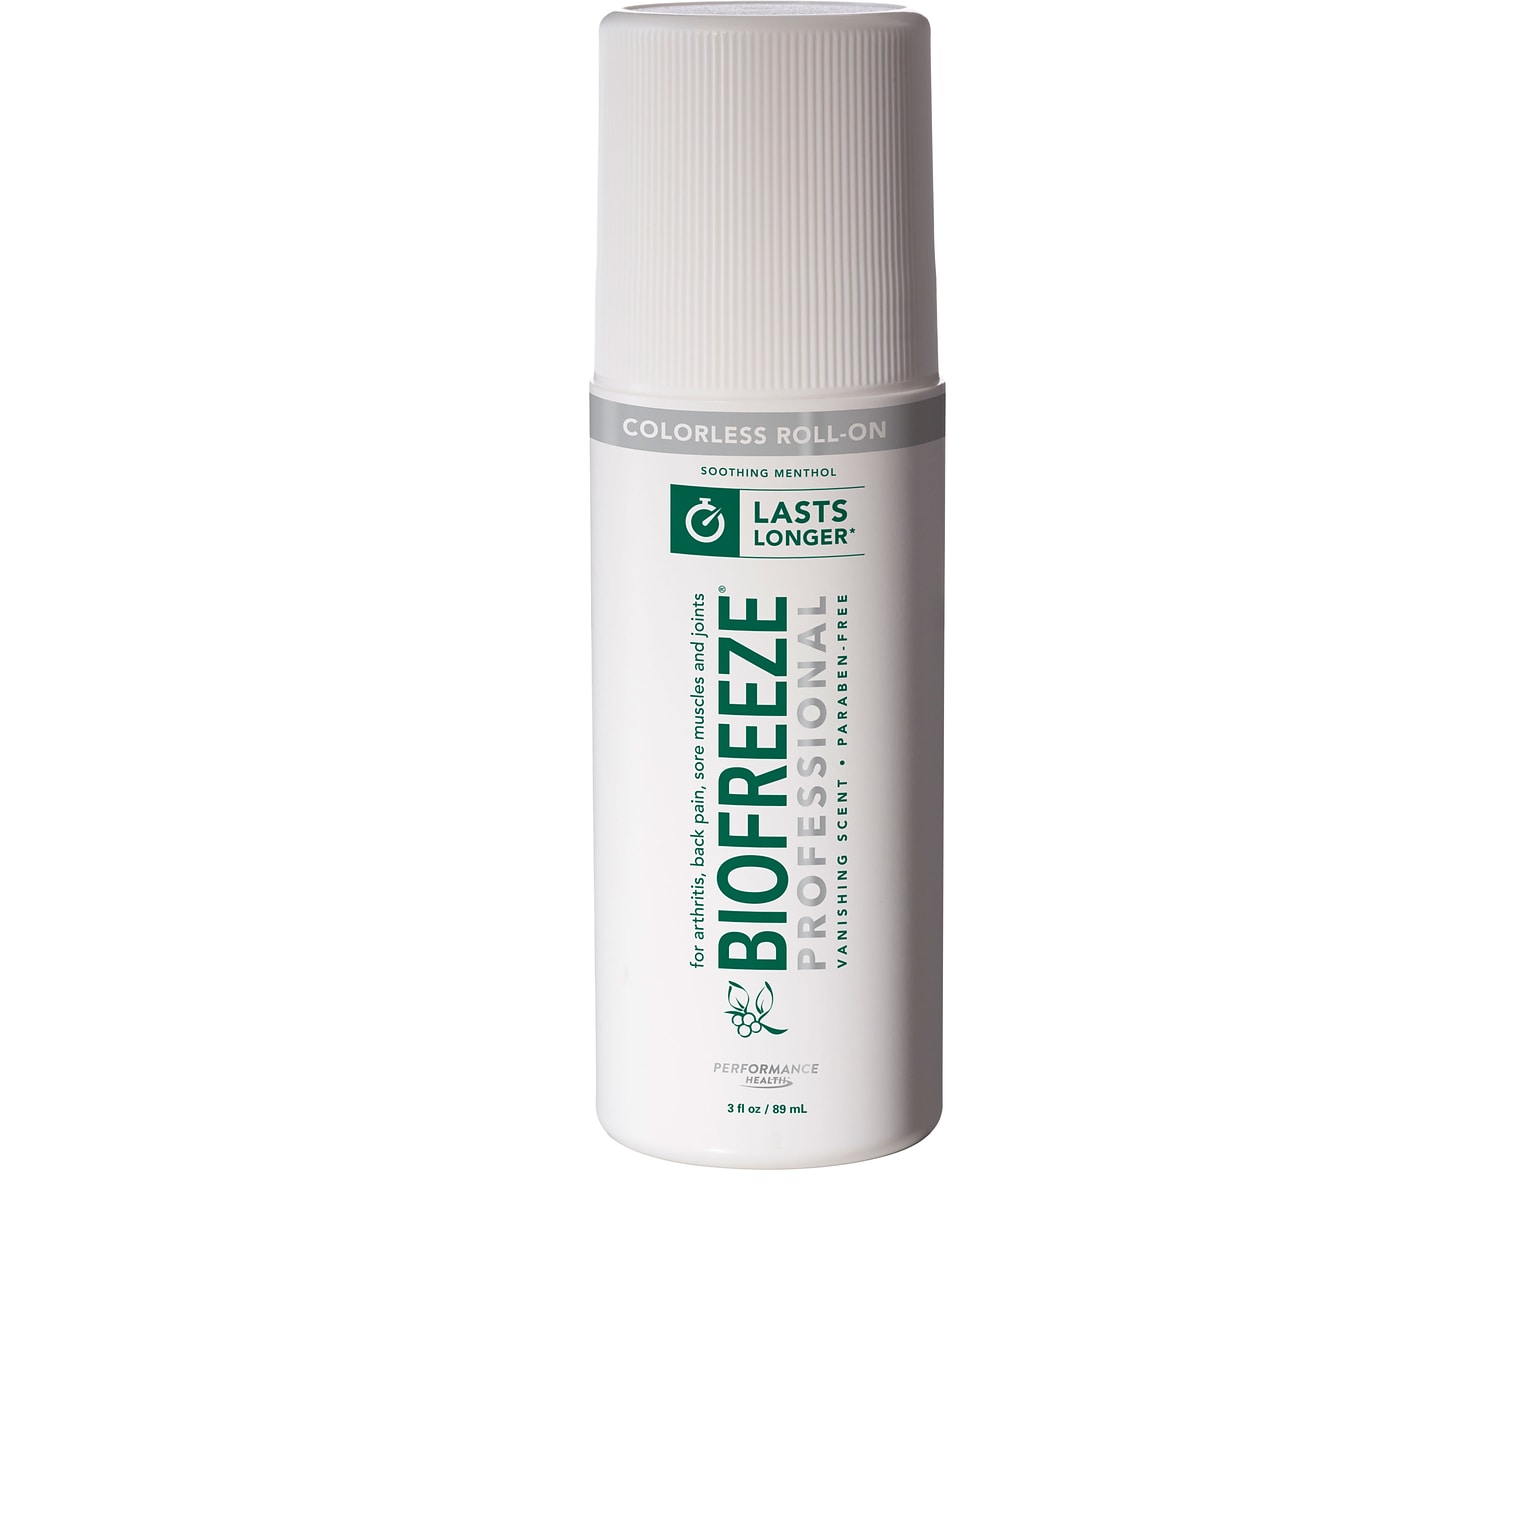 BIOFREEZE® Professional Roll-On; Colorless, 3-oz., 12-Pack